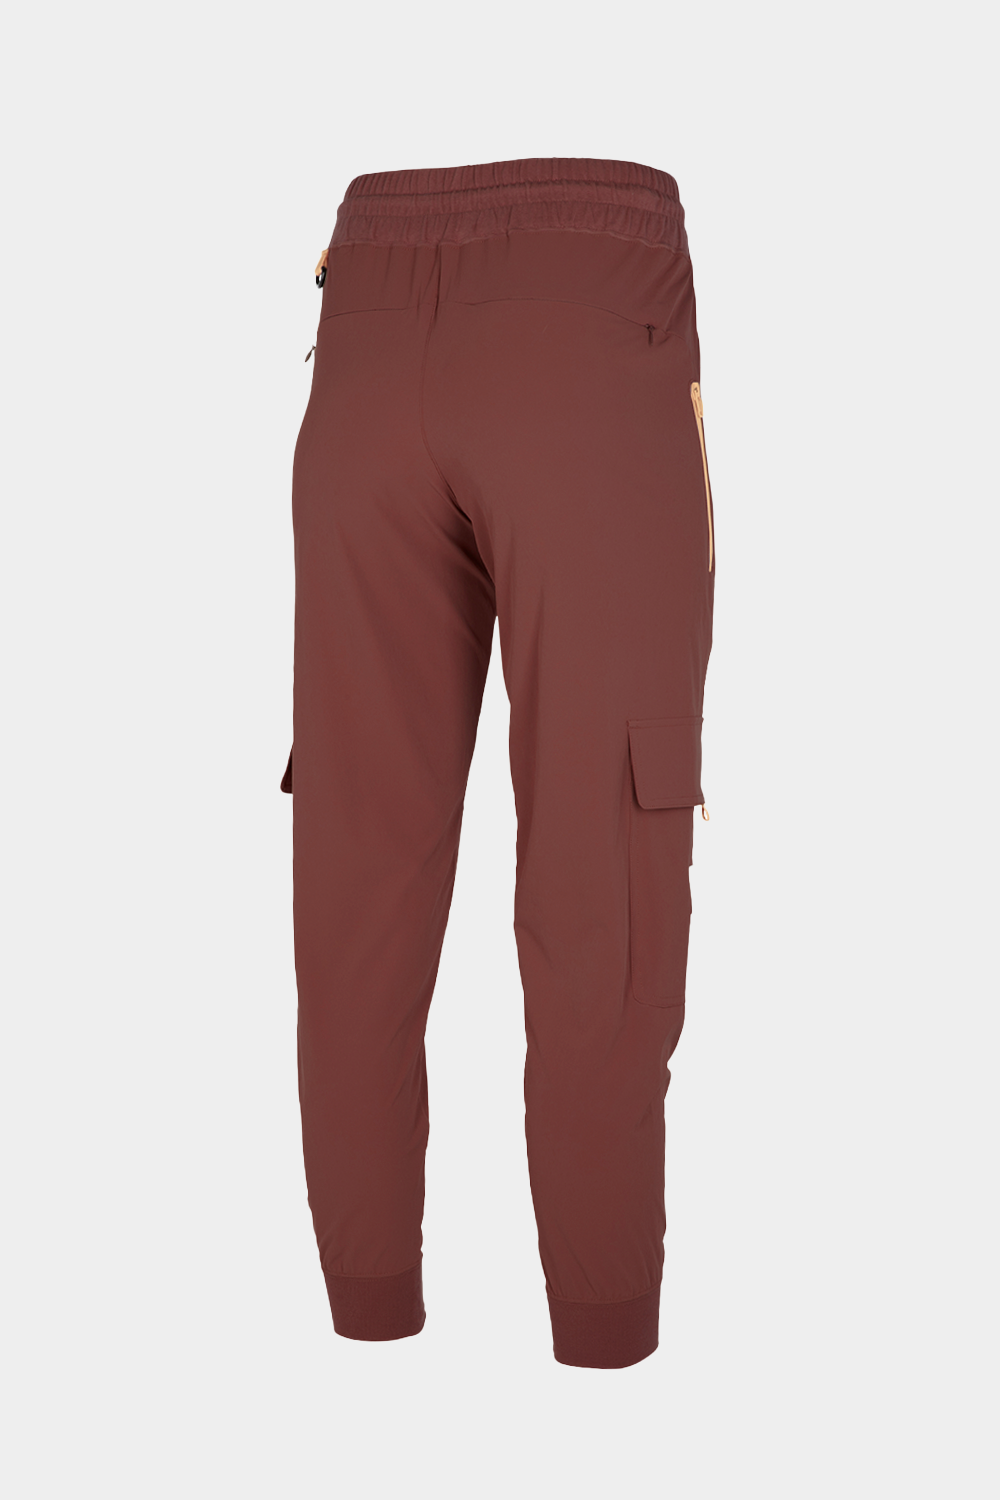 back view of burgundy red lightweight women's climbing pants with cargo pockets and elastic waistband on female mannequin